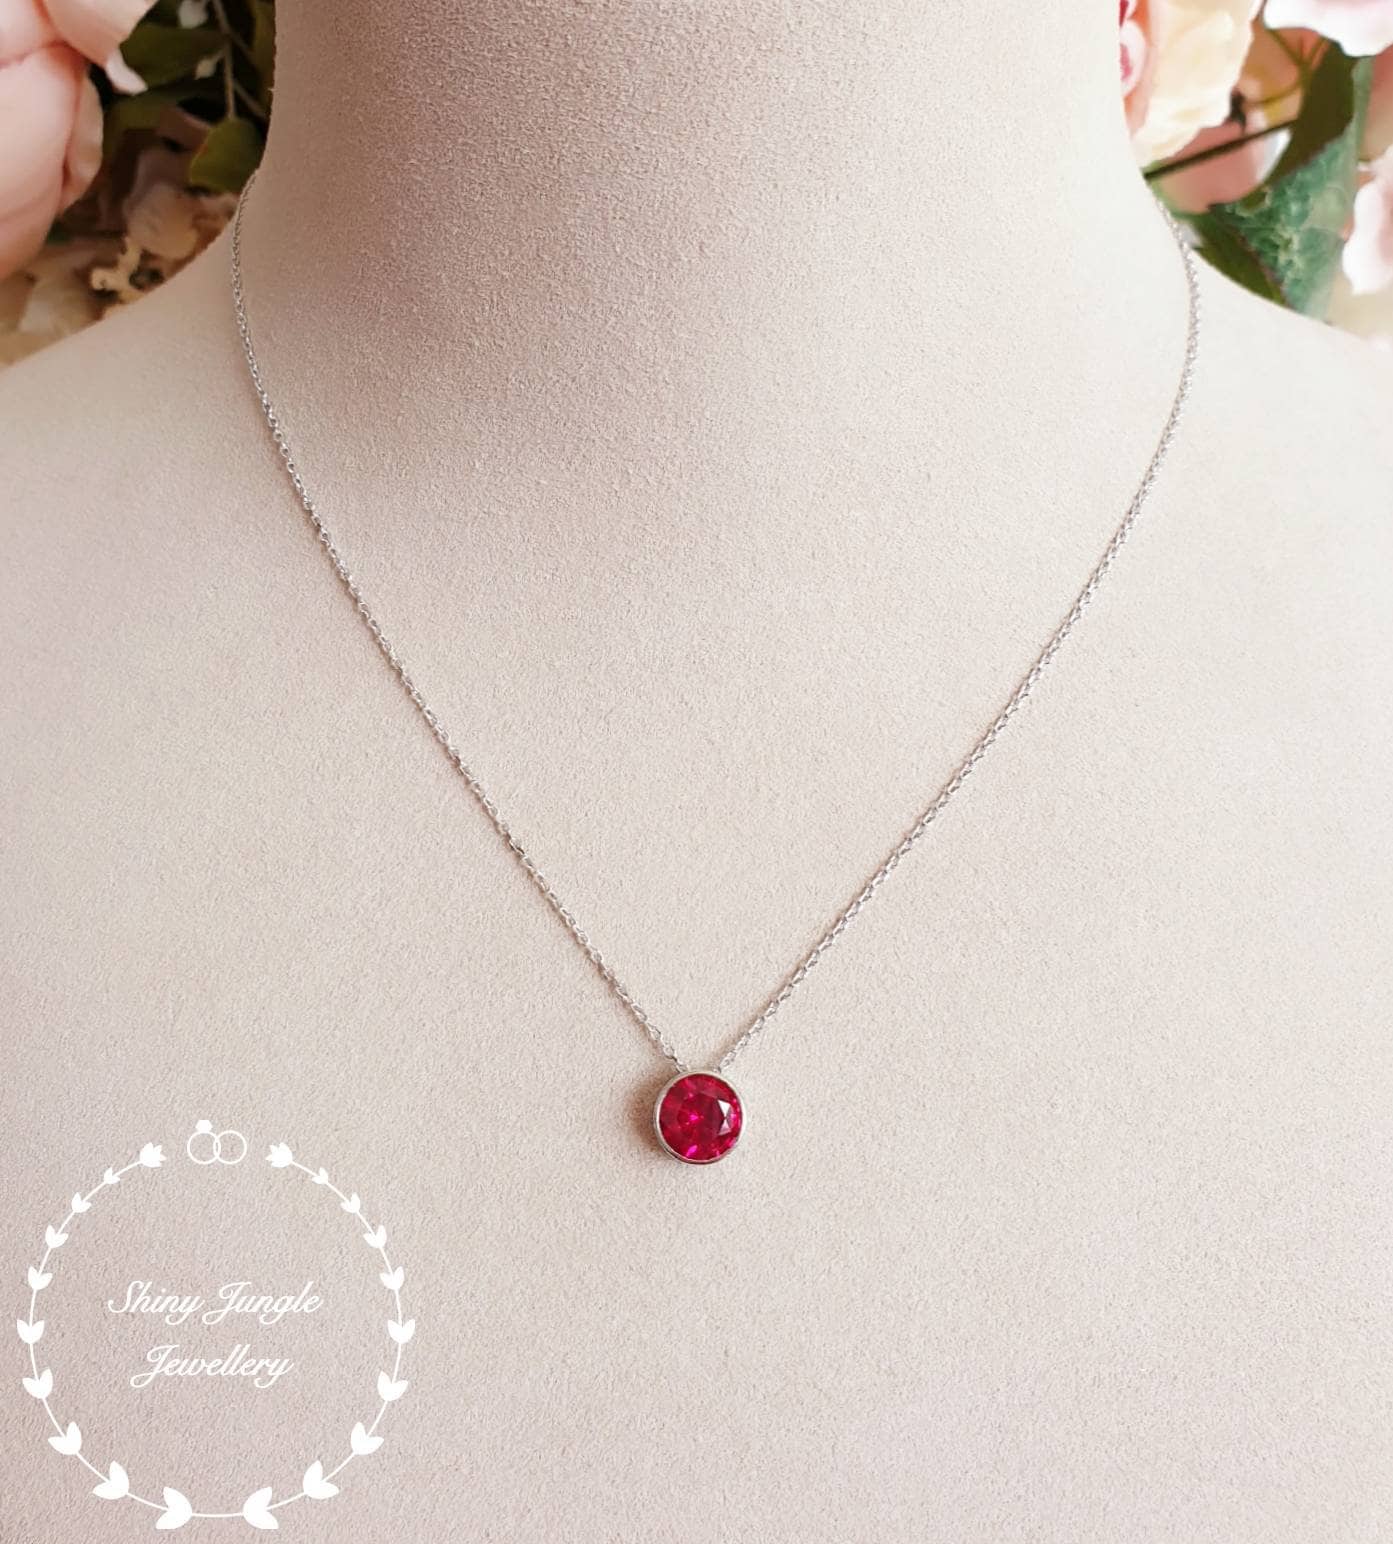 Round bezel set genuine lab grown ruby necklace, 2 carats ruby pendant ...